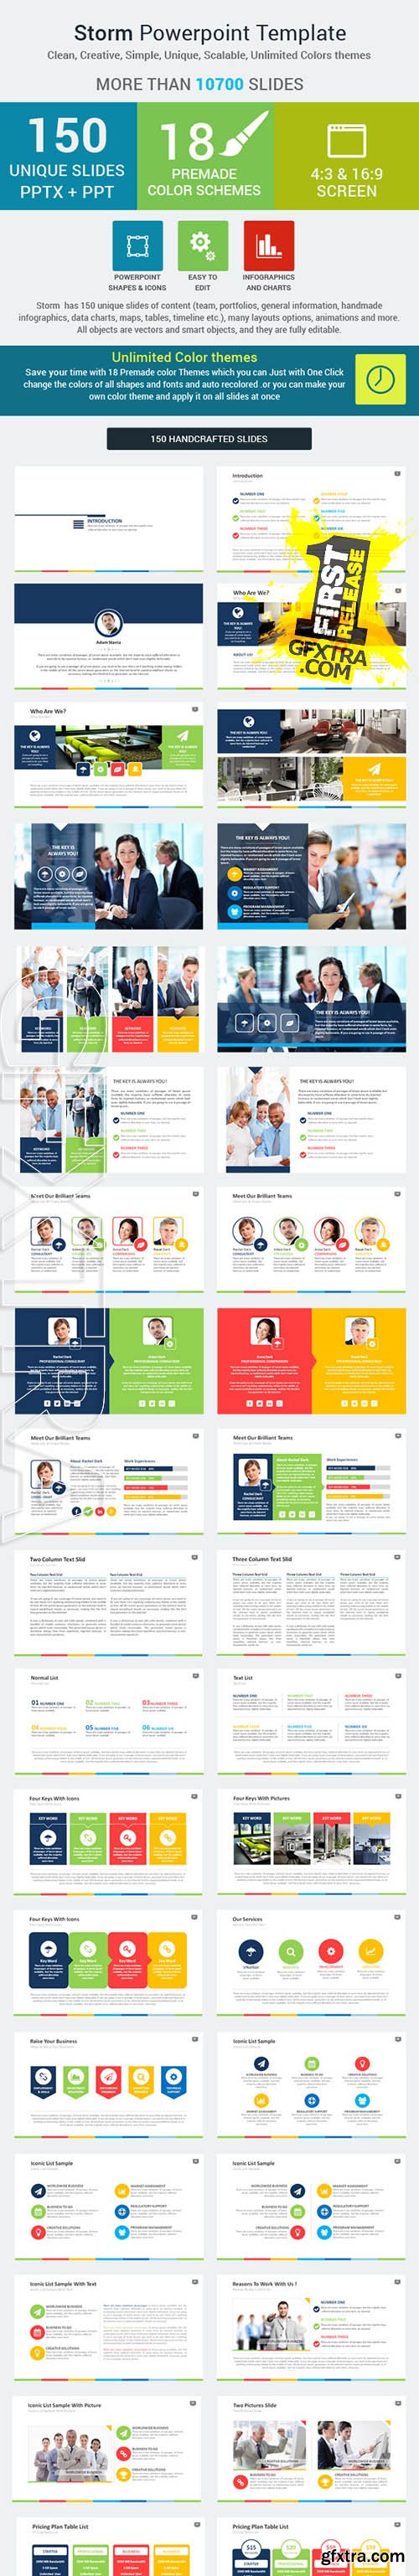 Storm PowerPoint Presentation Template - GraphicRiver 8987774